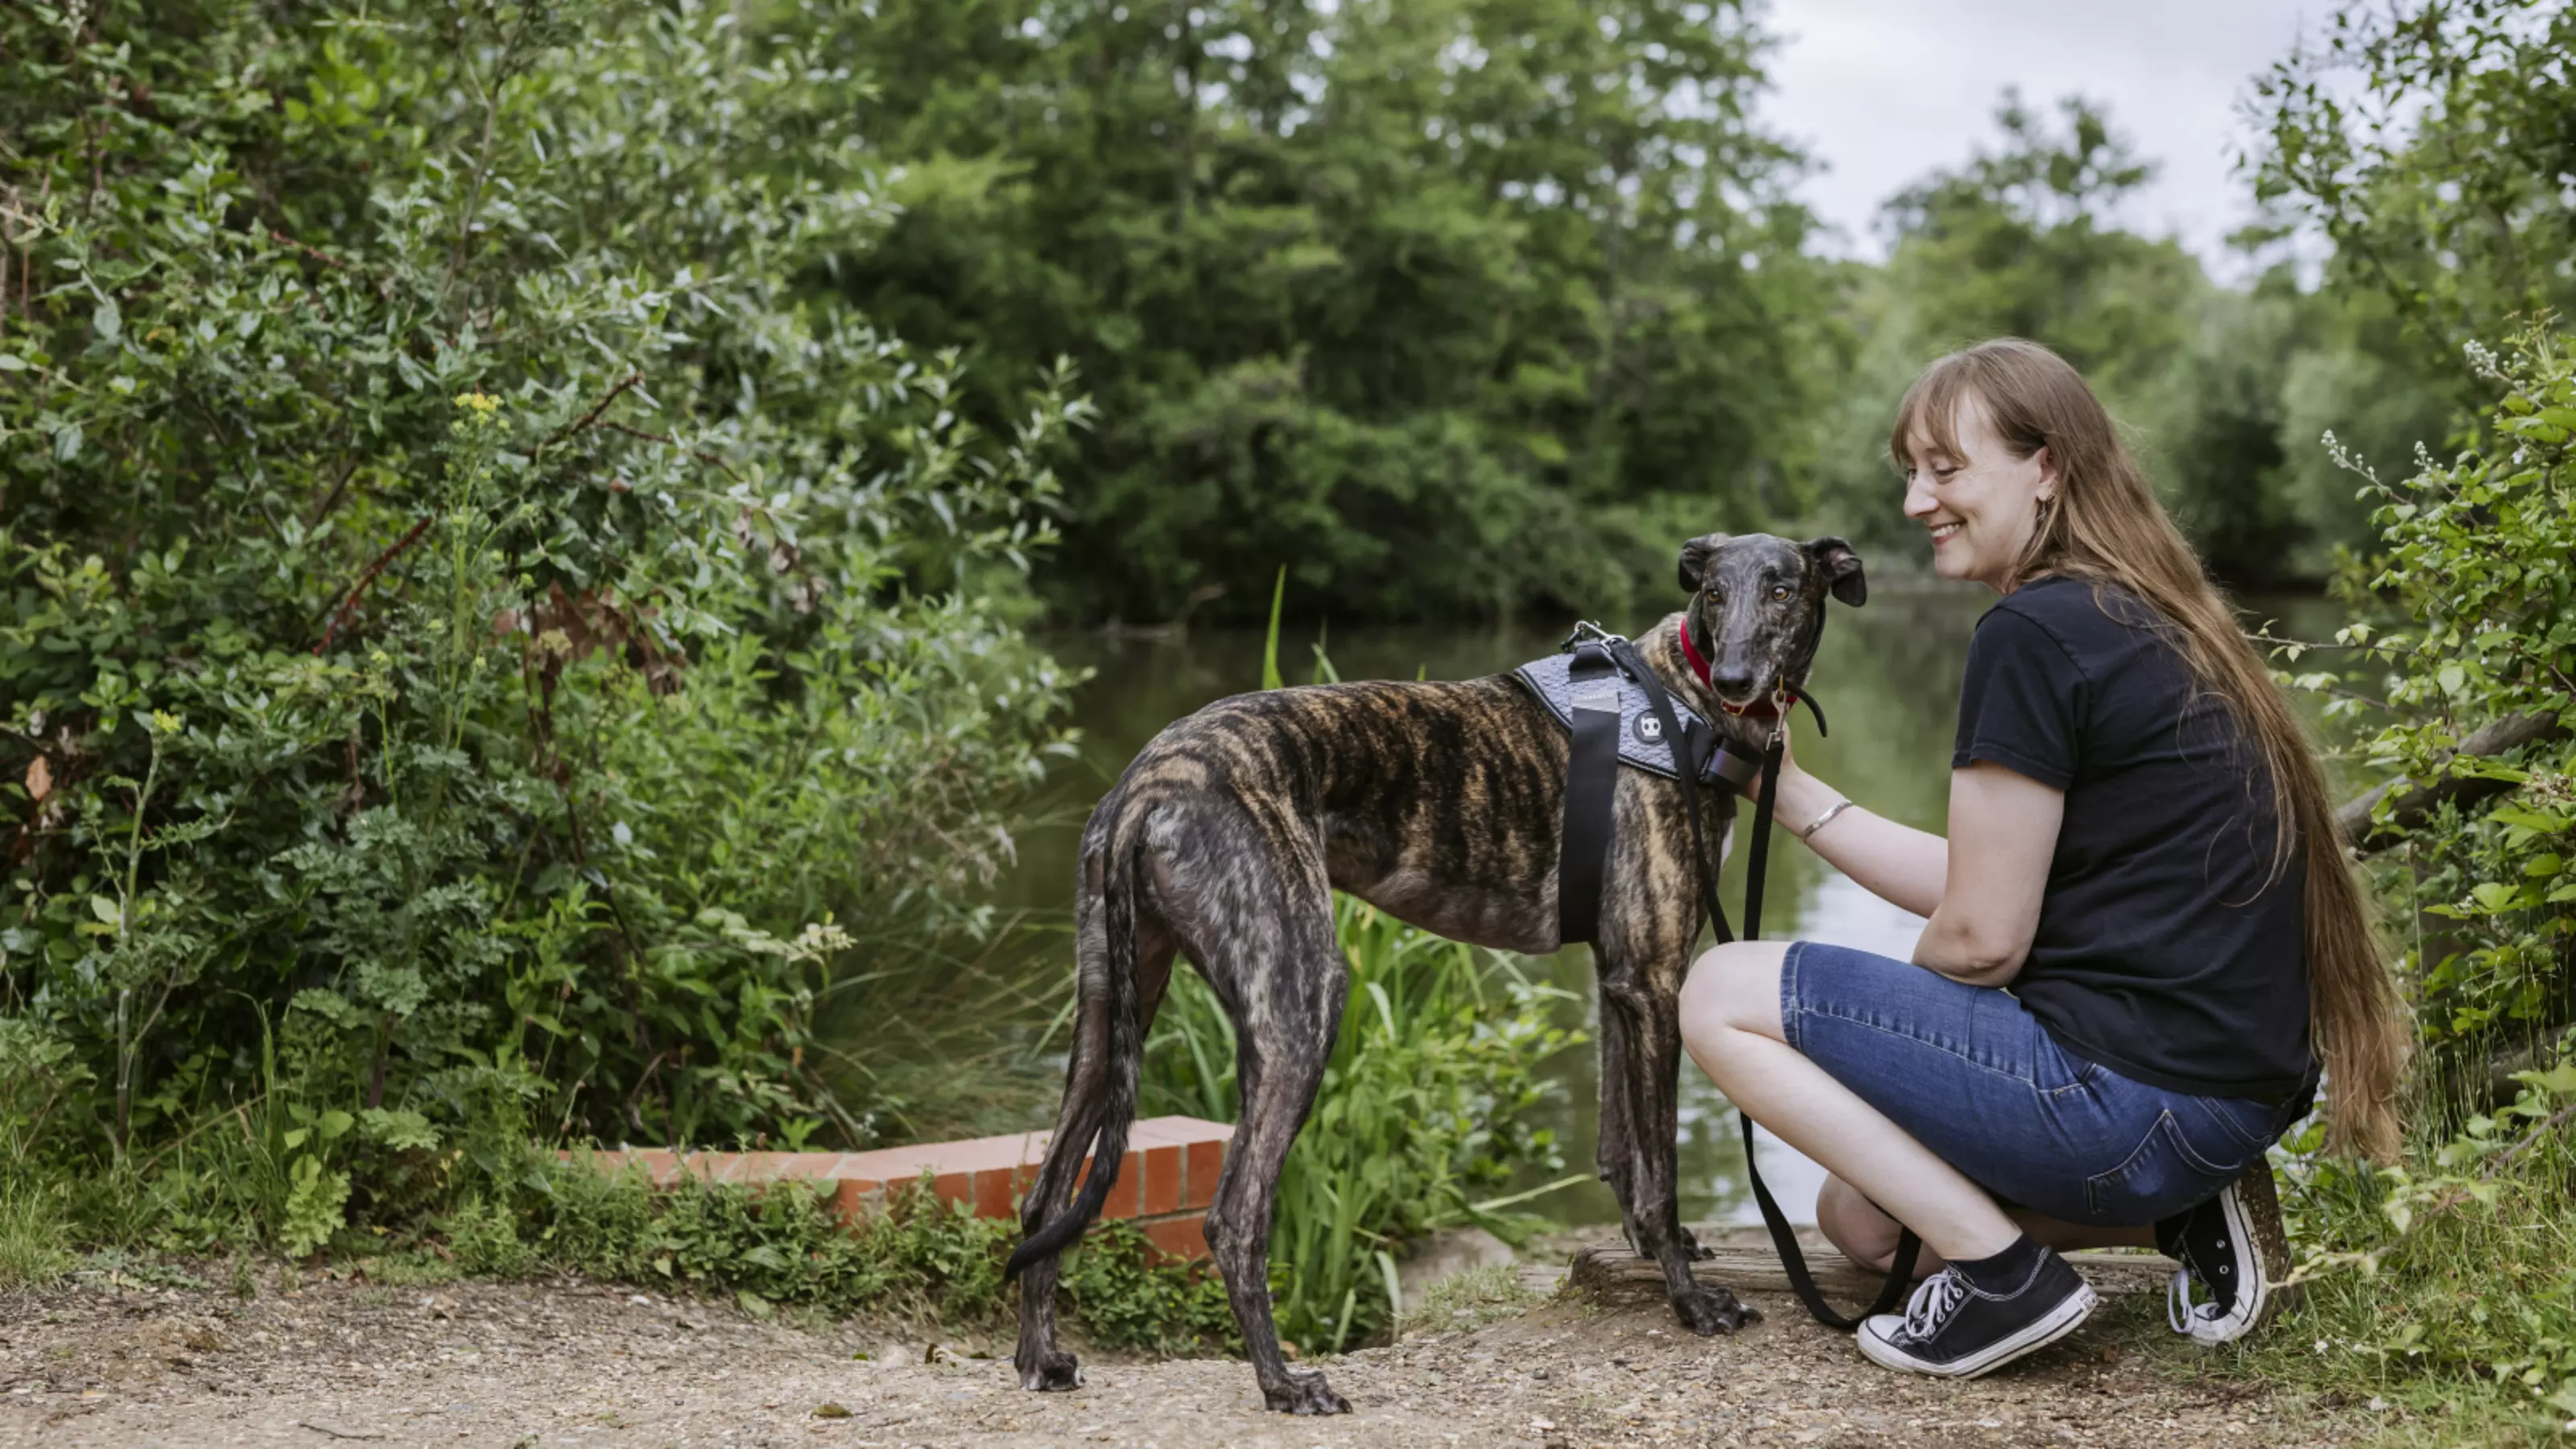 Kit gives greyhound Amos a fuss while on a walk next to a lake